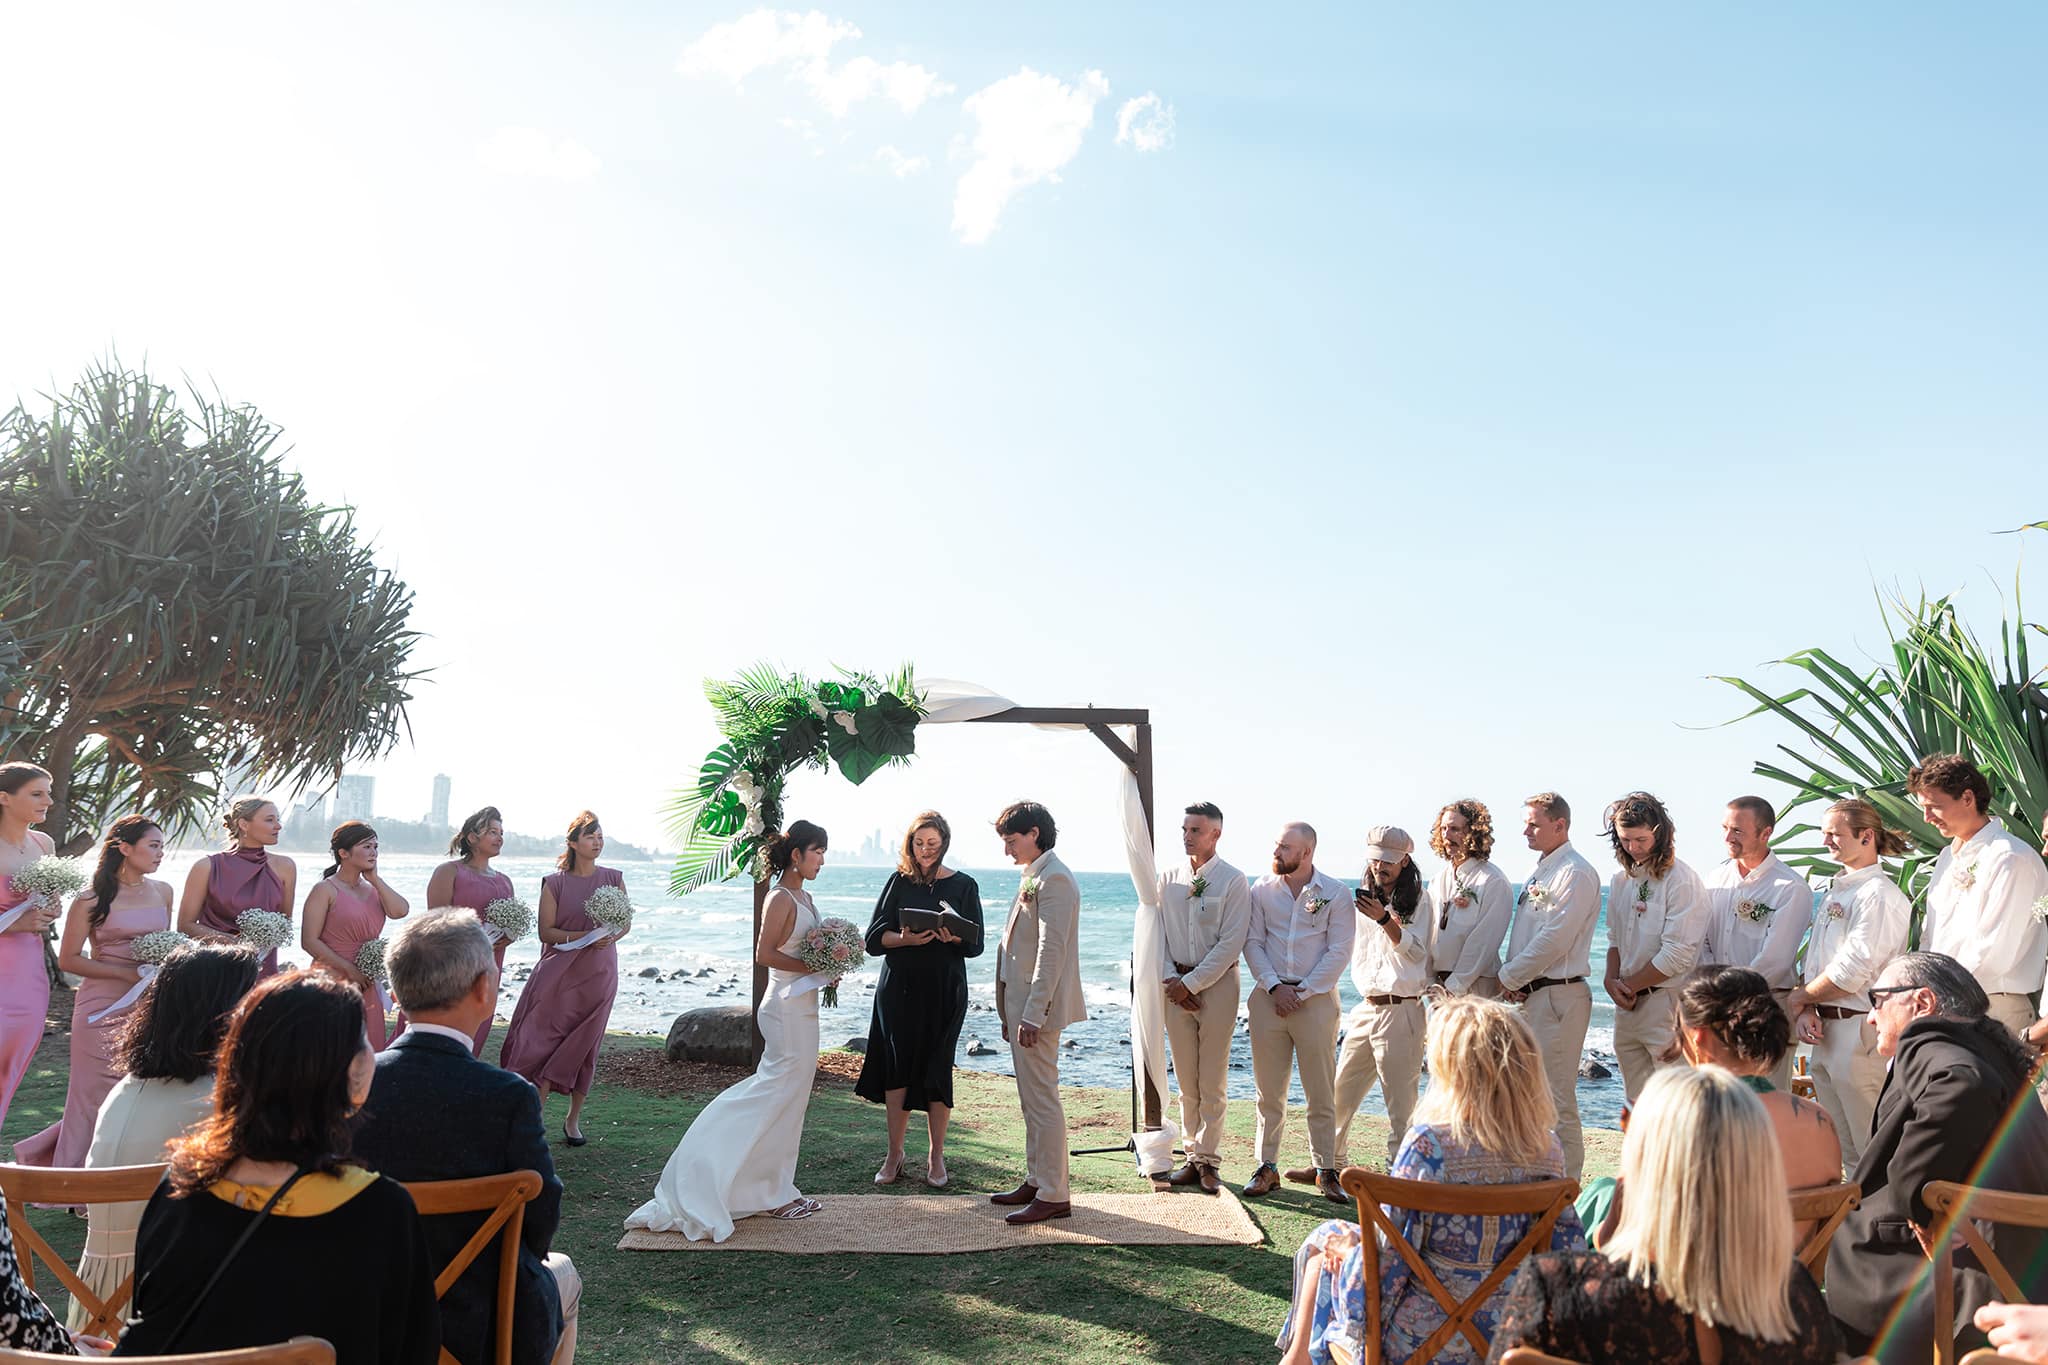 Wedding ceremony at Burleigh Heads on the Gold Coast, by Mooi photography.